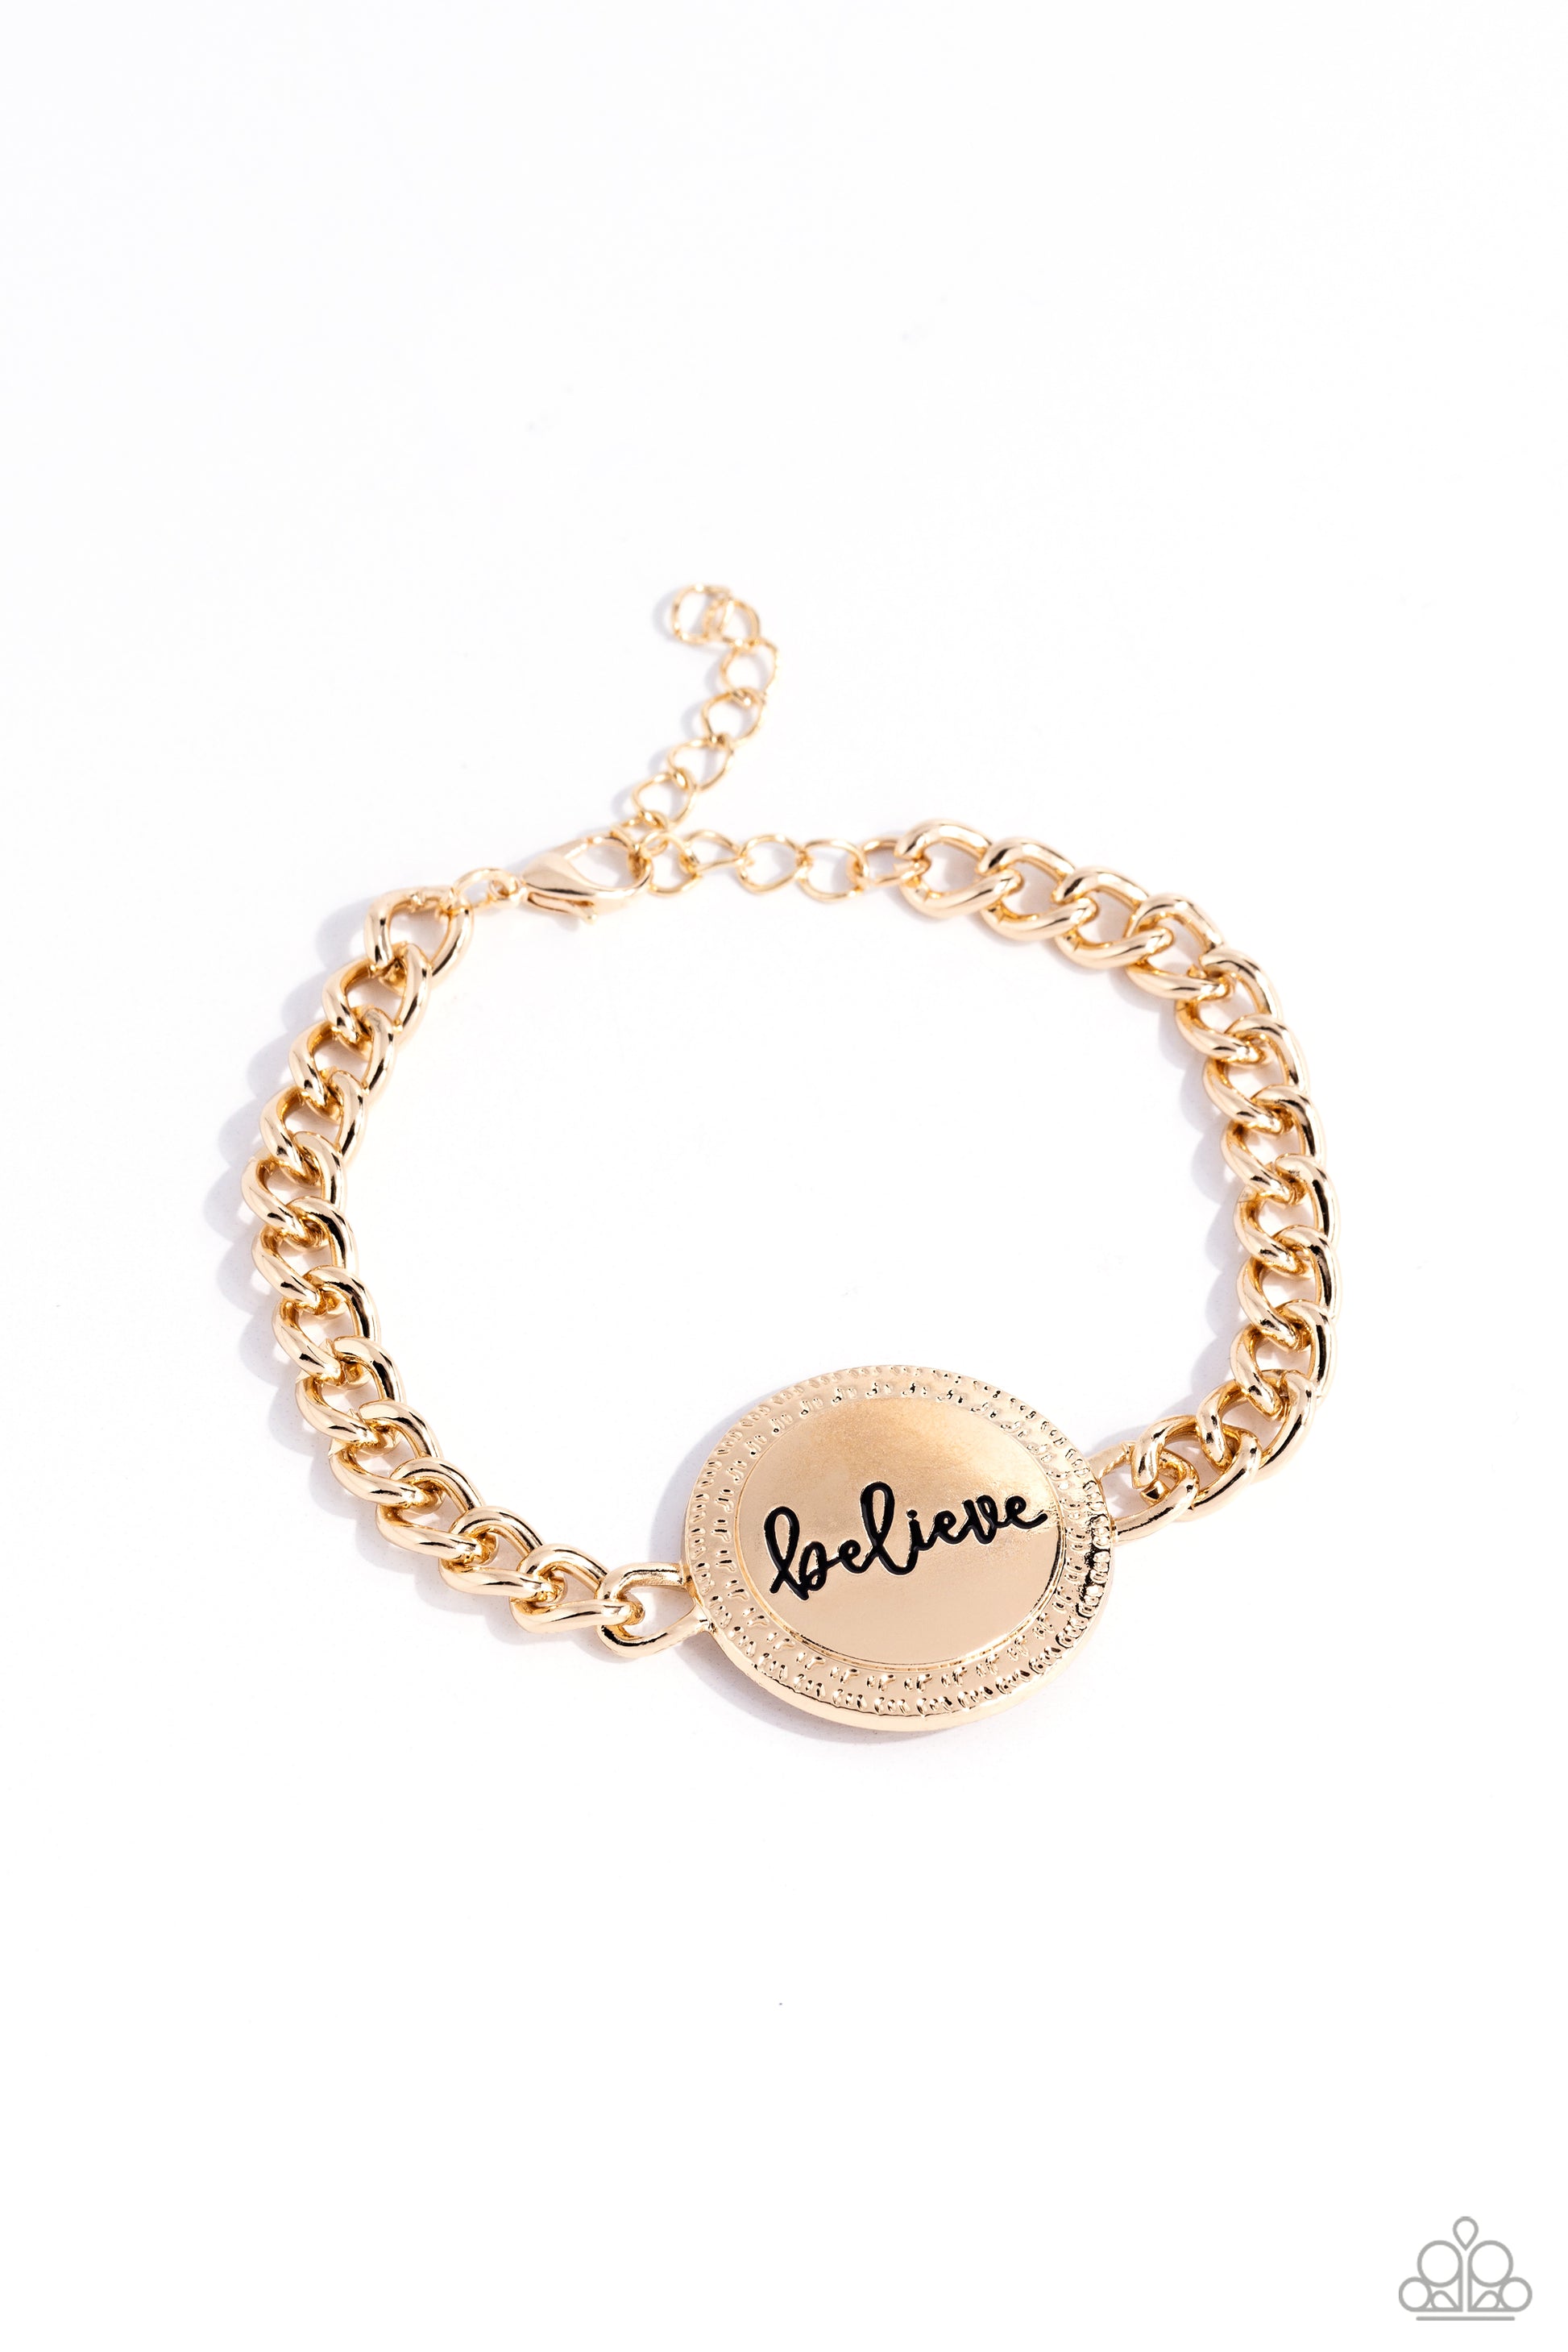 Paparazzi Accessories - Hope and Faith - Gold Bracelets a gold disc is anchored at the center of a thick gold chain that wraps around the wrist. The word "believe" is etched into the center of the gold disc in a fancy script as a textured border decorates the edge. Features an adjustable clasp closure.  Sold as one individual bracelet.